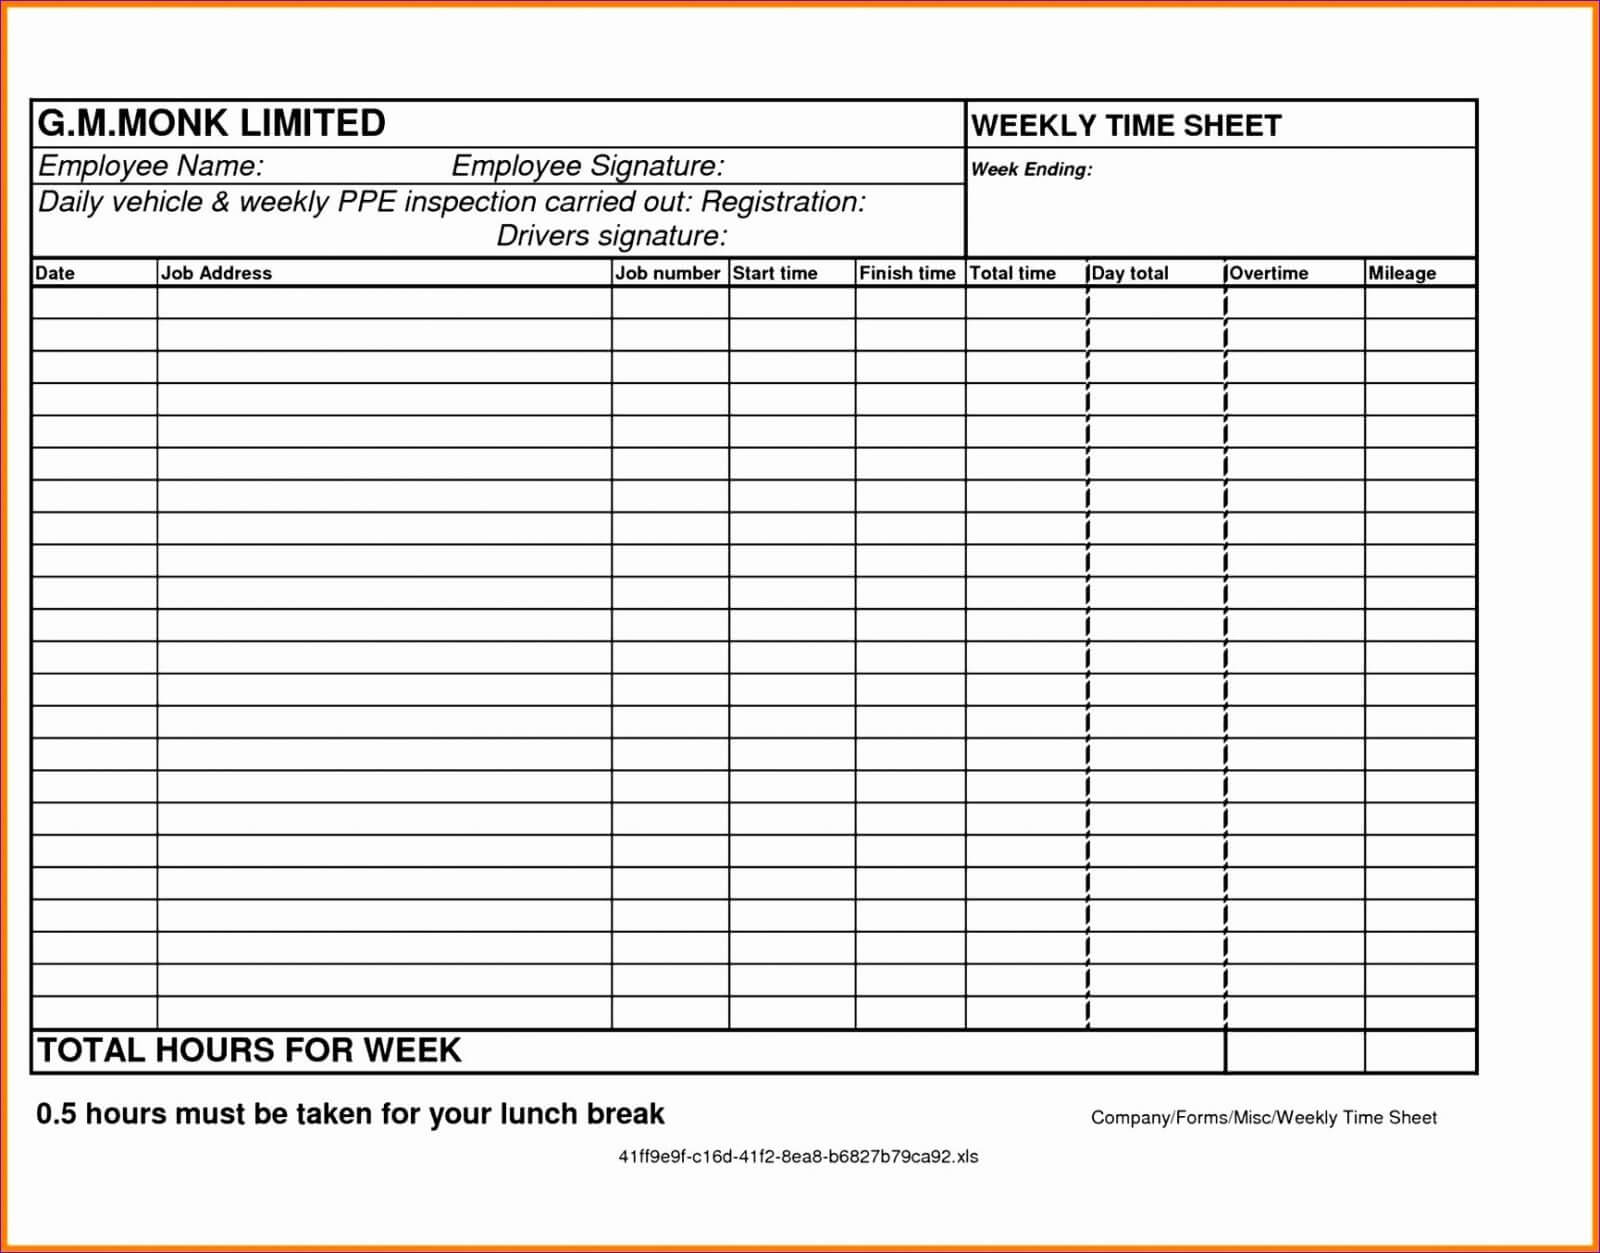 027 Weekly Time Card Samples Template Ideas Printable Intended For Weekly Time Card Template Free